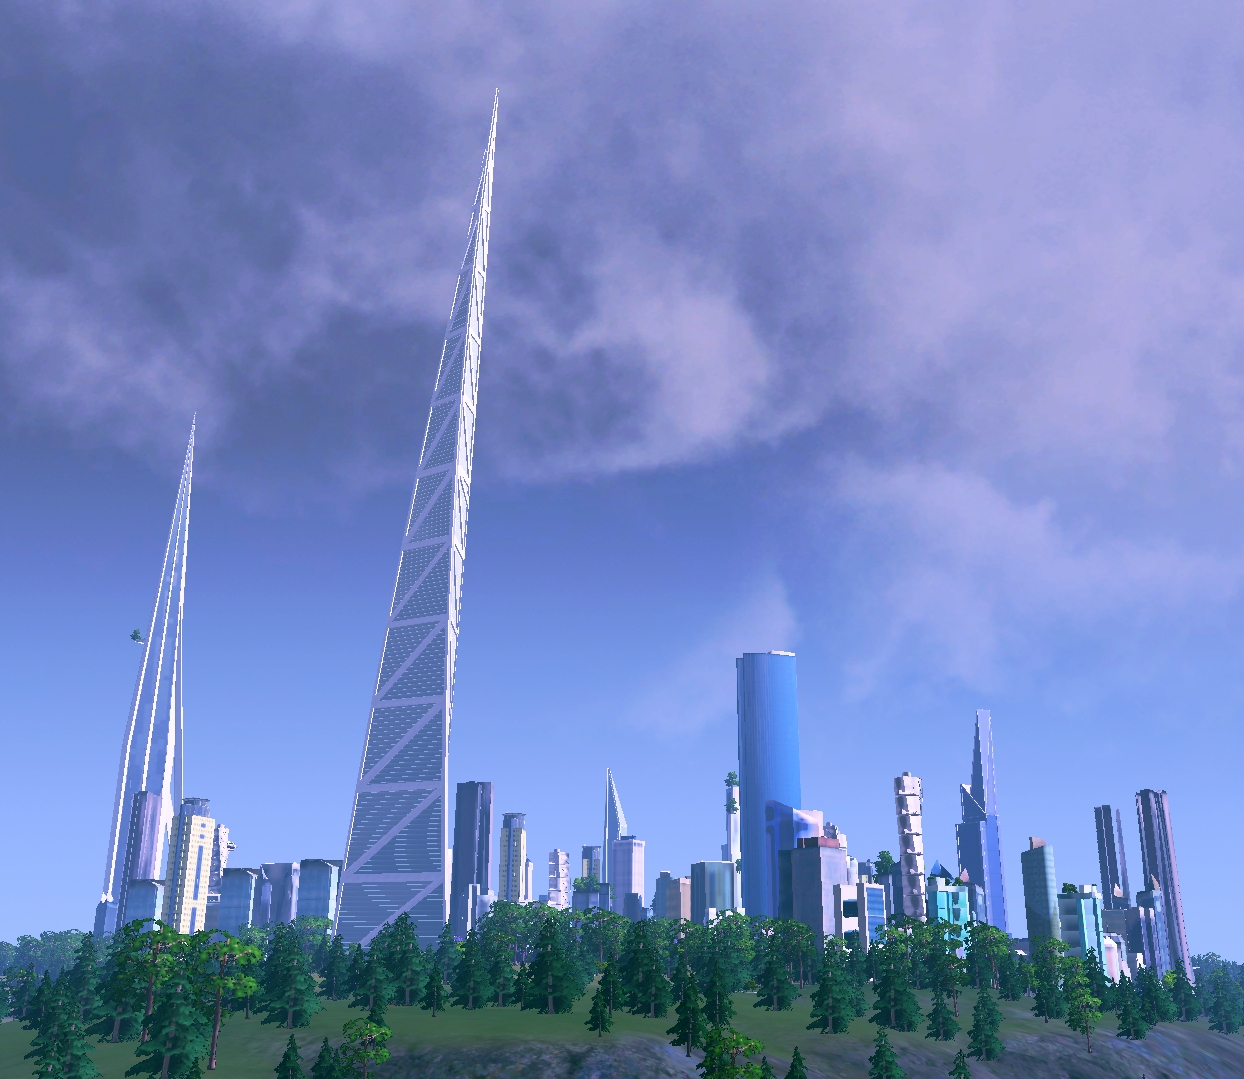 download cities skylines for android